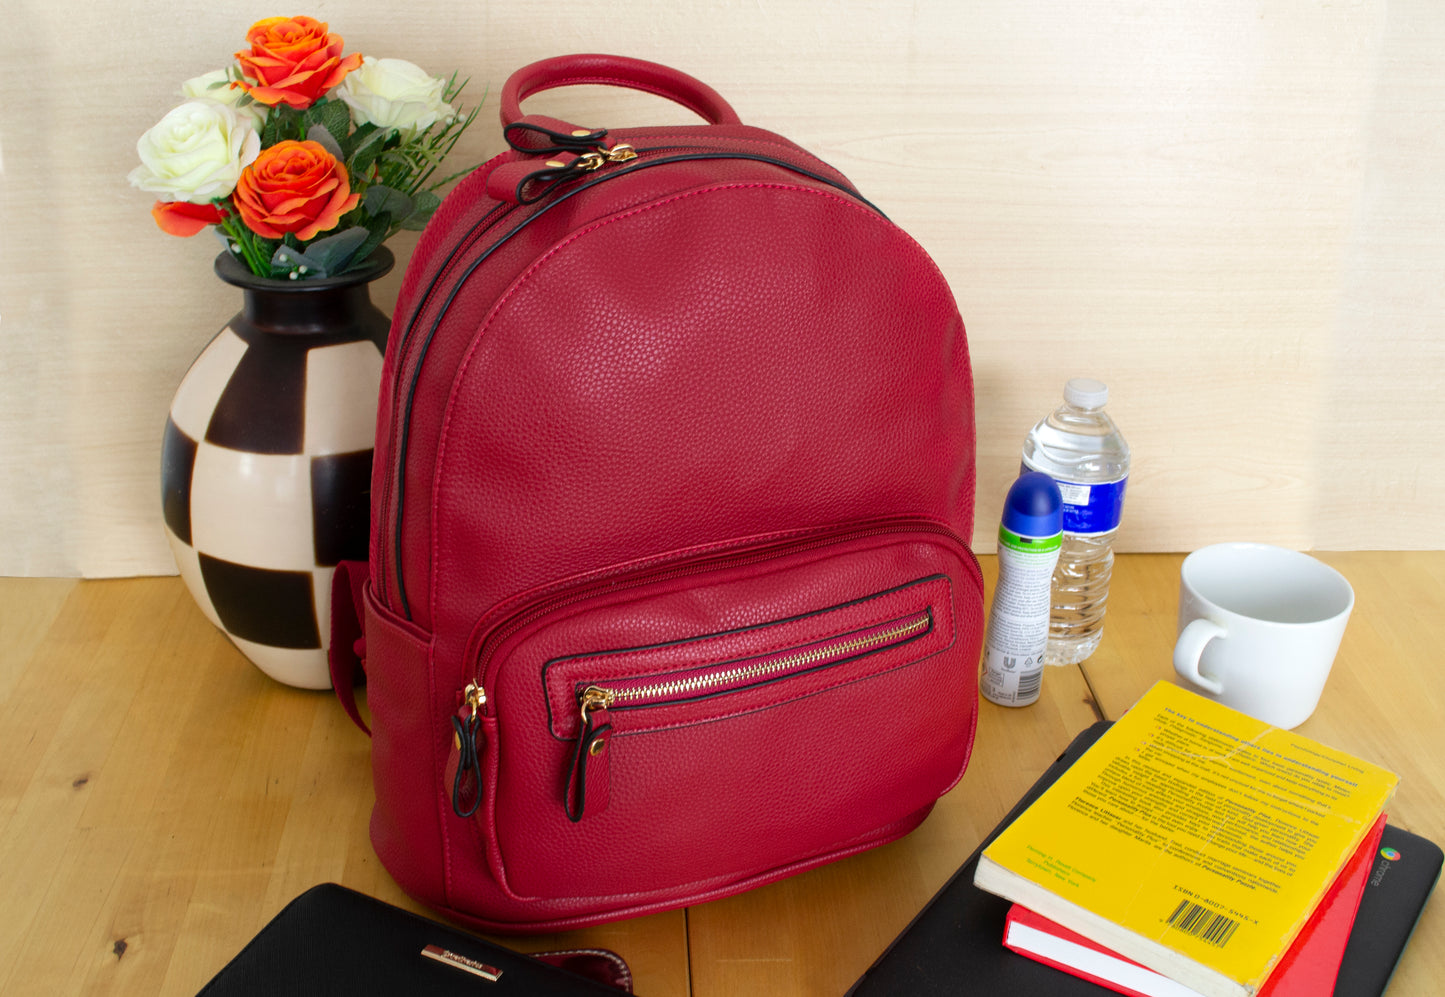 Large Faux Leather Backpack